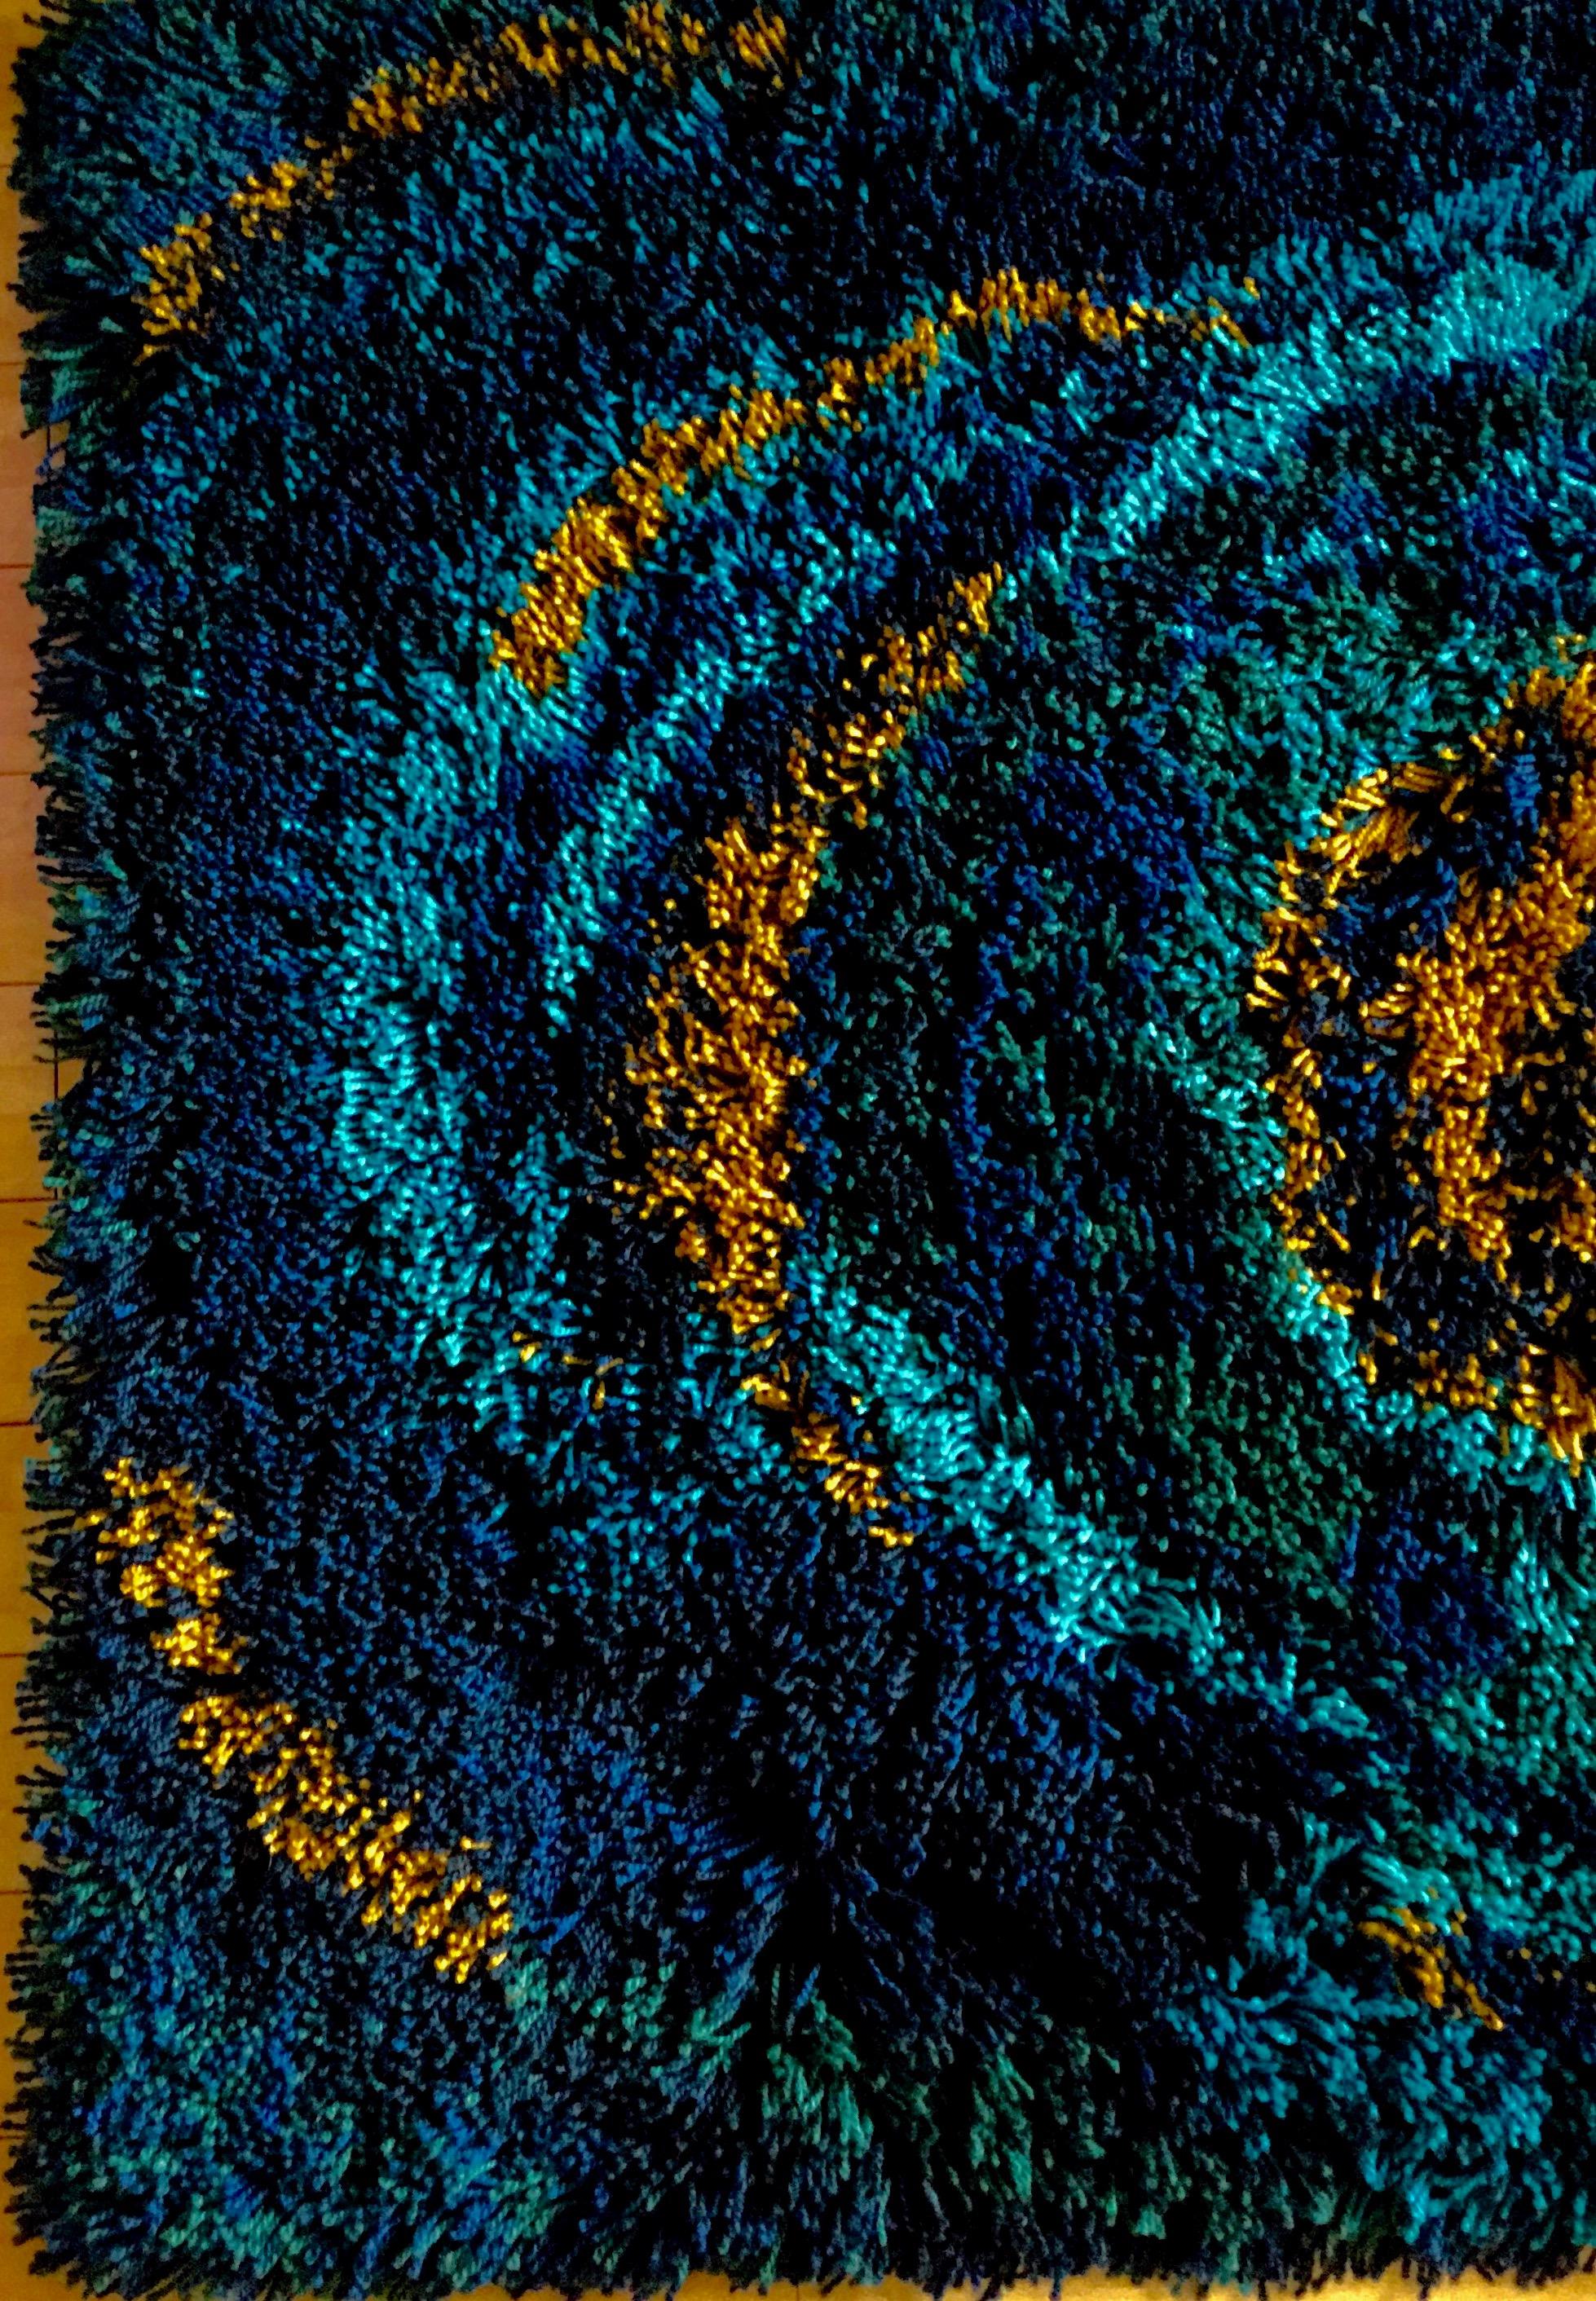 Mid-Century Modern Blue Danish Midcentury Rya Rug by EGE Taepper in Abstract Shag Pile